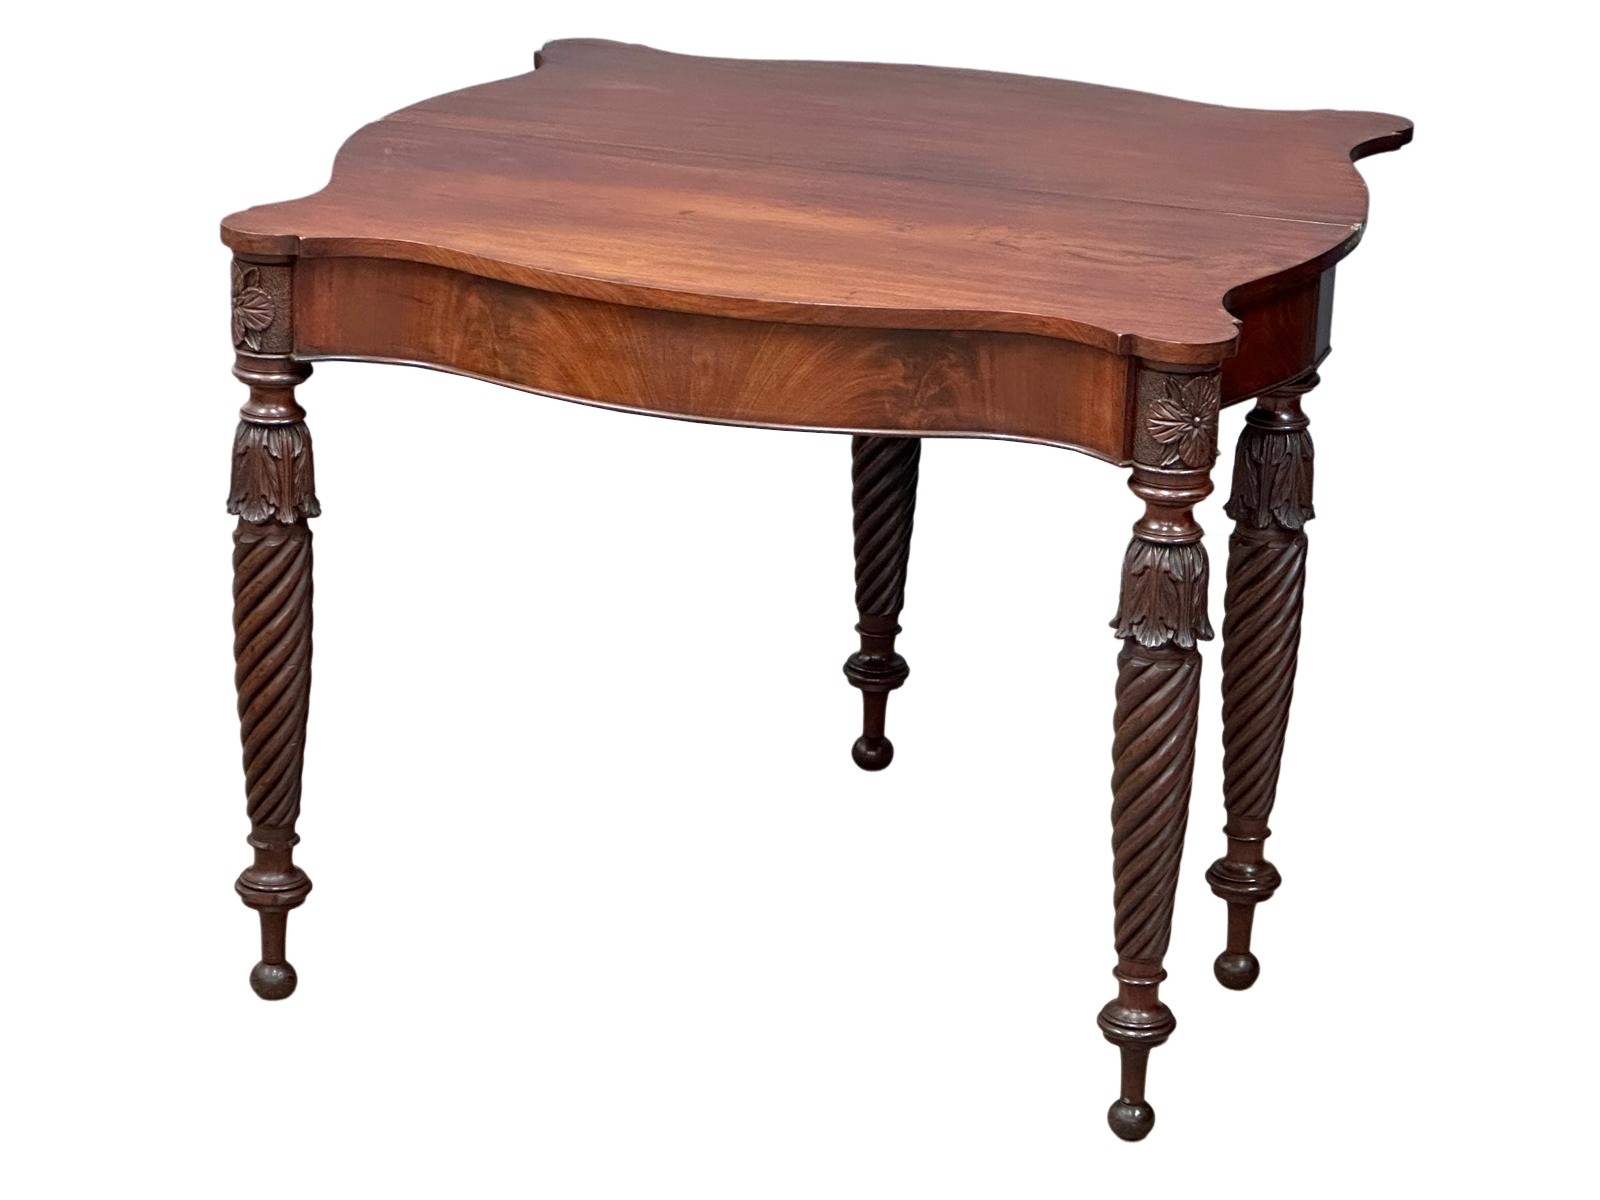 A William IV mahogany serpentine front turnover tea table on turned legs. Circa 1830. 87x44x75cm - Image 4 of 9